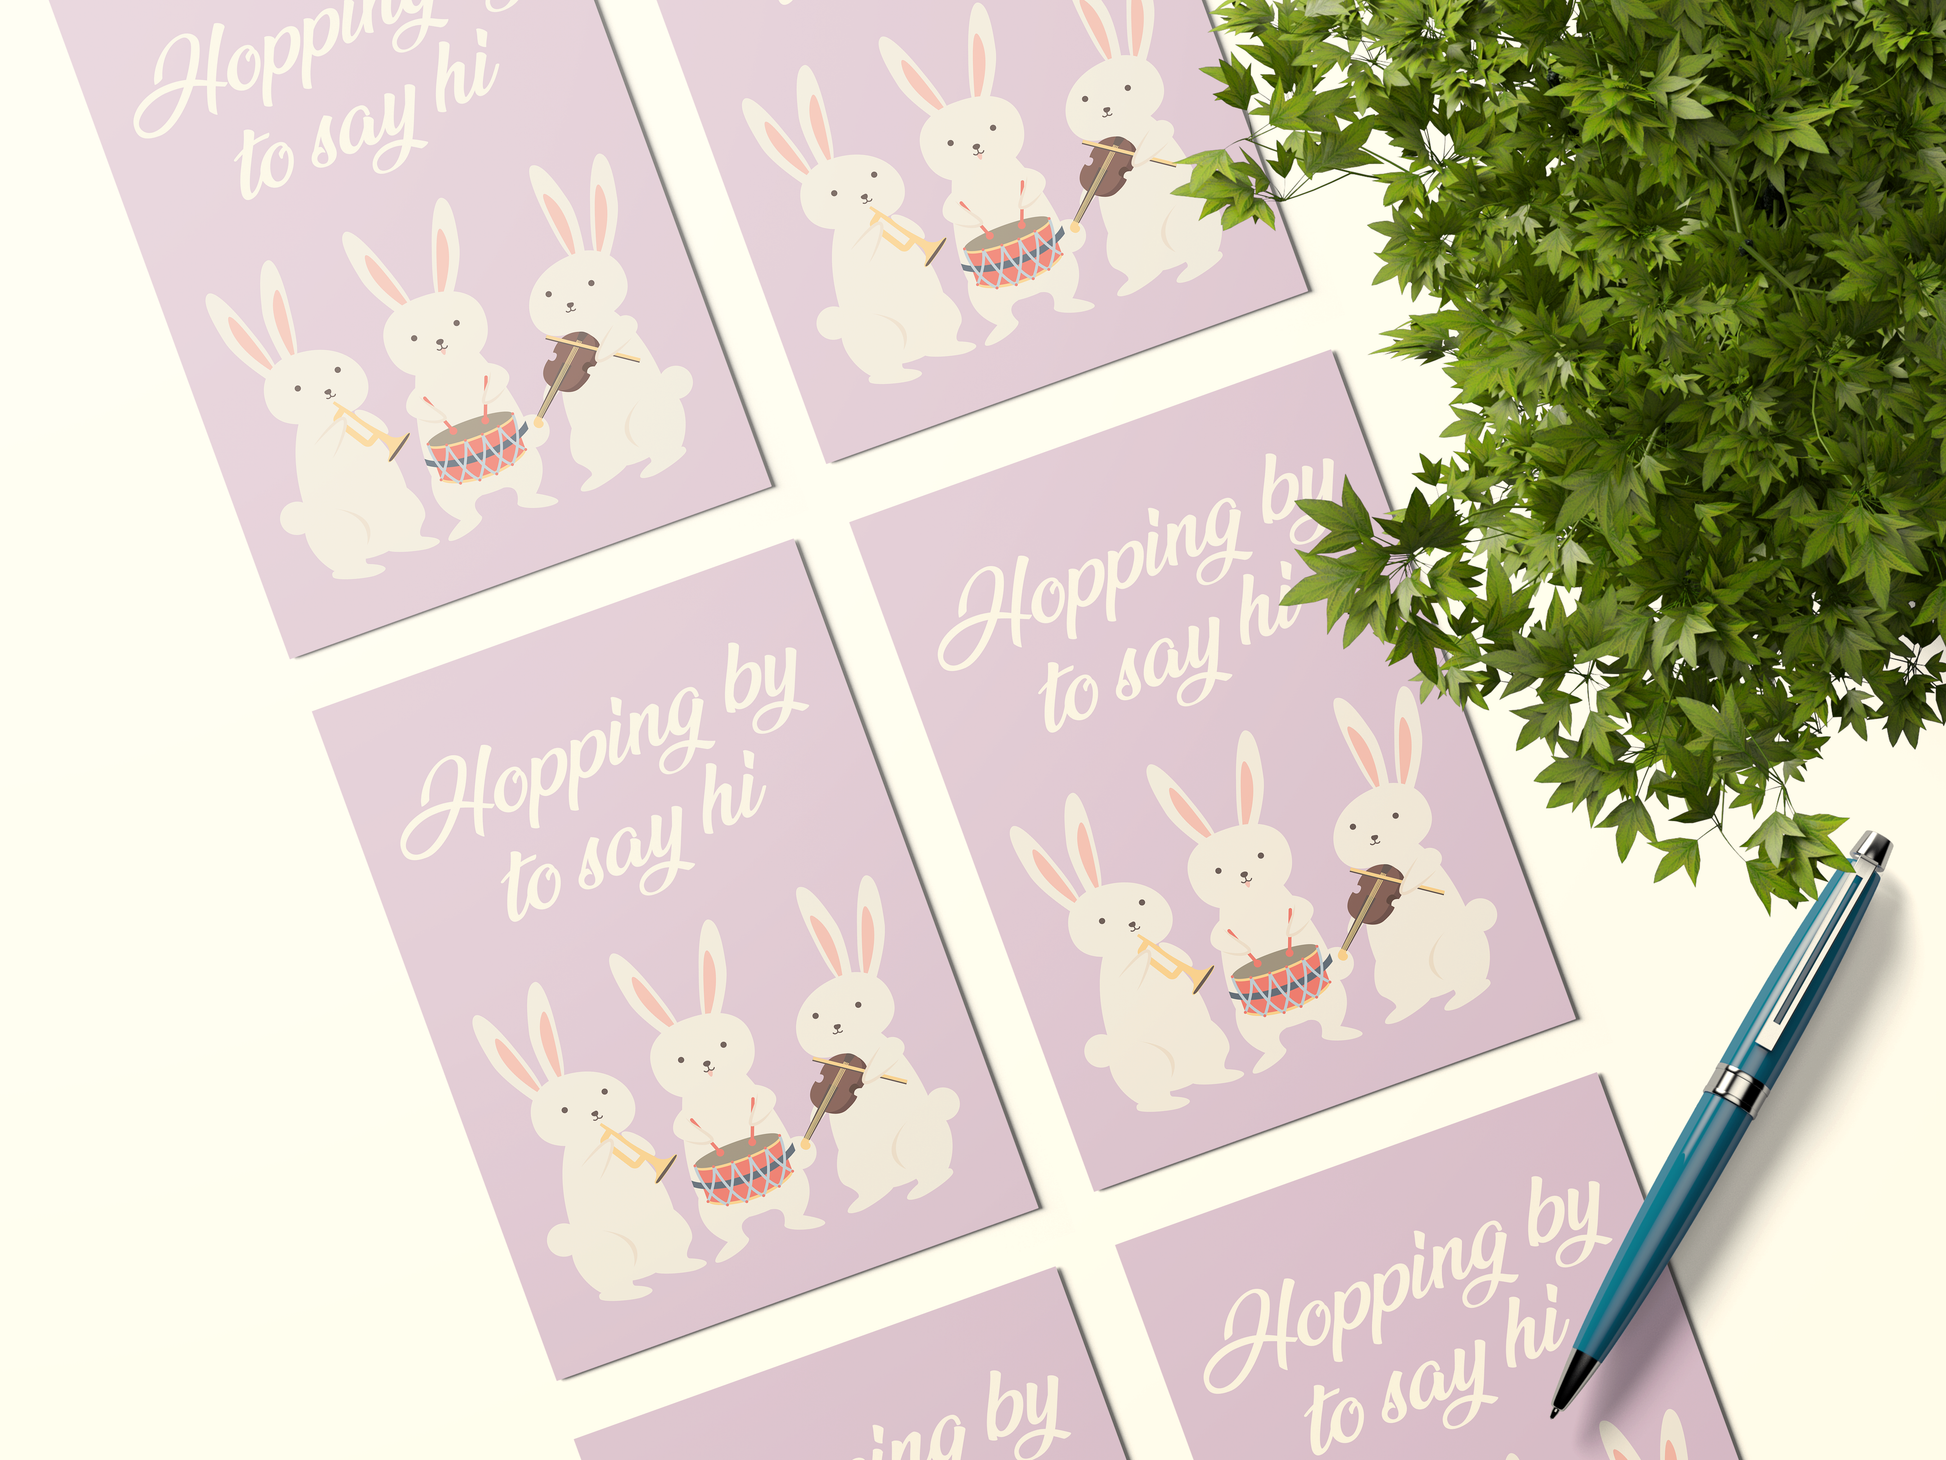 Happy Easter Postcards: "Hopping By To Say Hi" Postcard Packs 5 Or 10 Count.